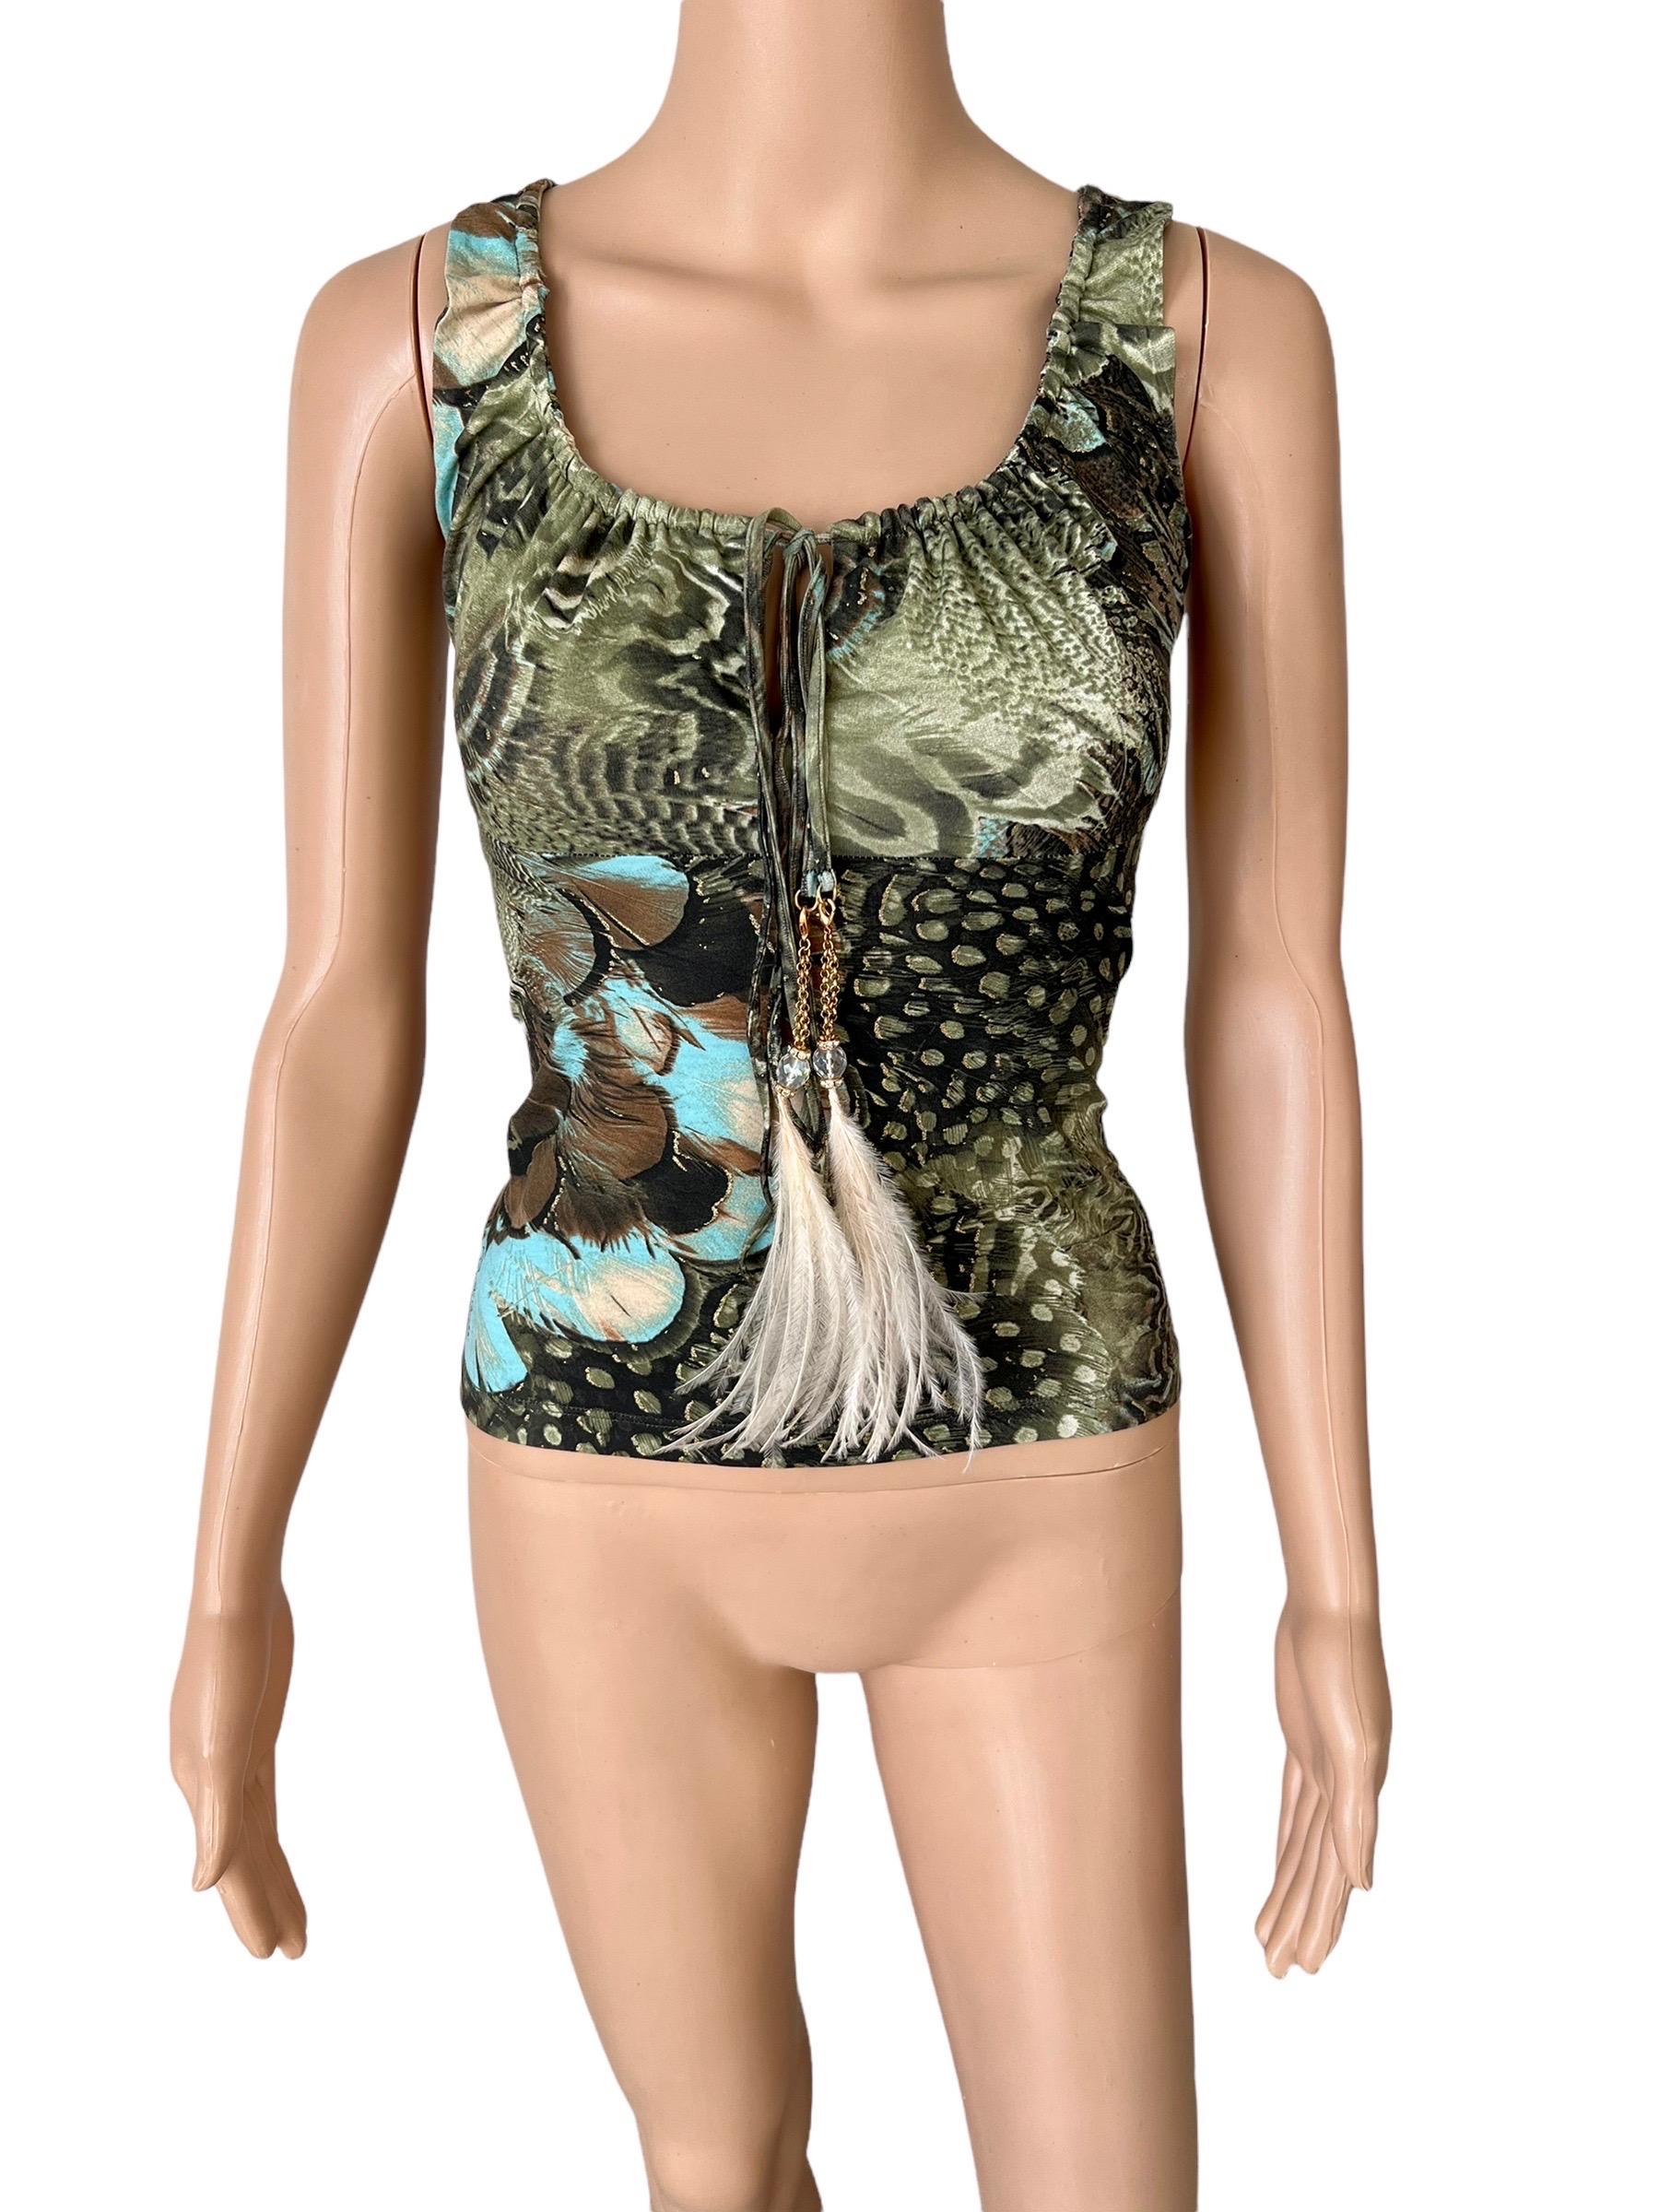 Roberto Cavalli S/S 2004 Bustier Feather Embellished Top In Good Condition In Naples, FL